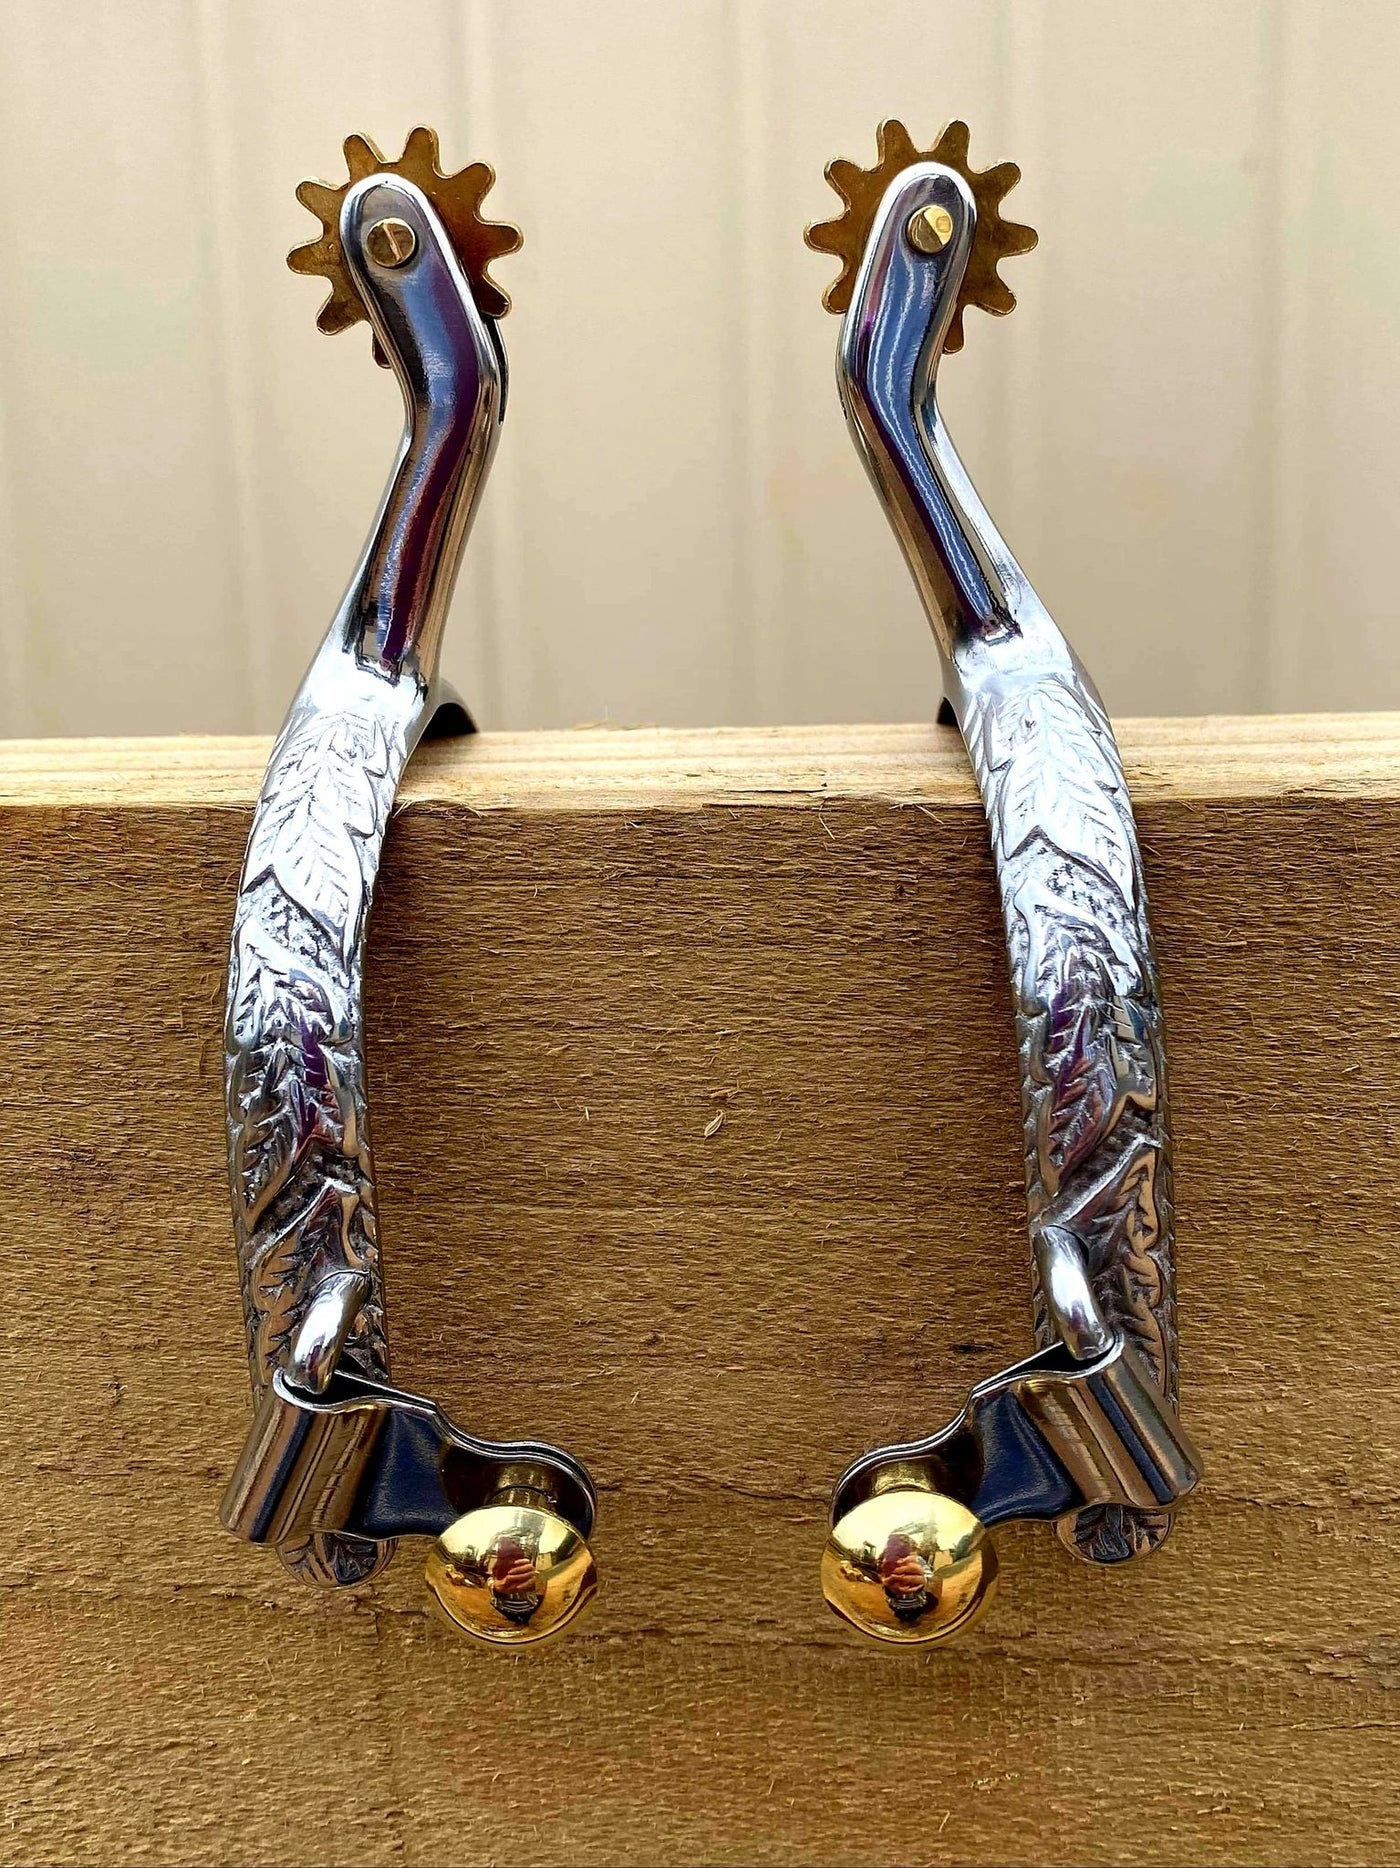 Spurs -  Ladies stainless steel spurs with brass rowel